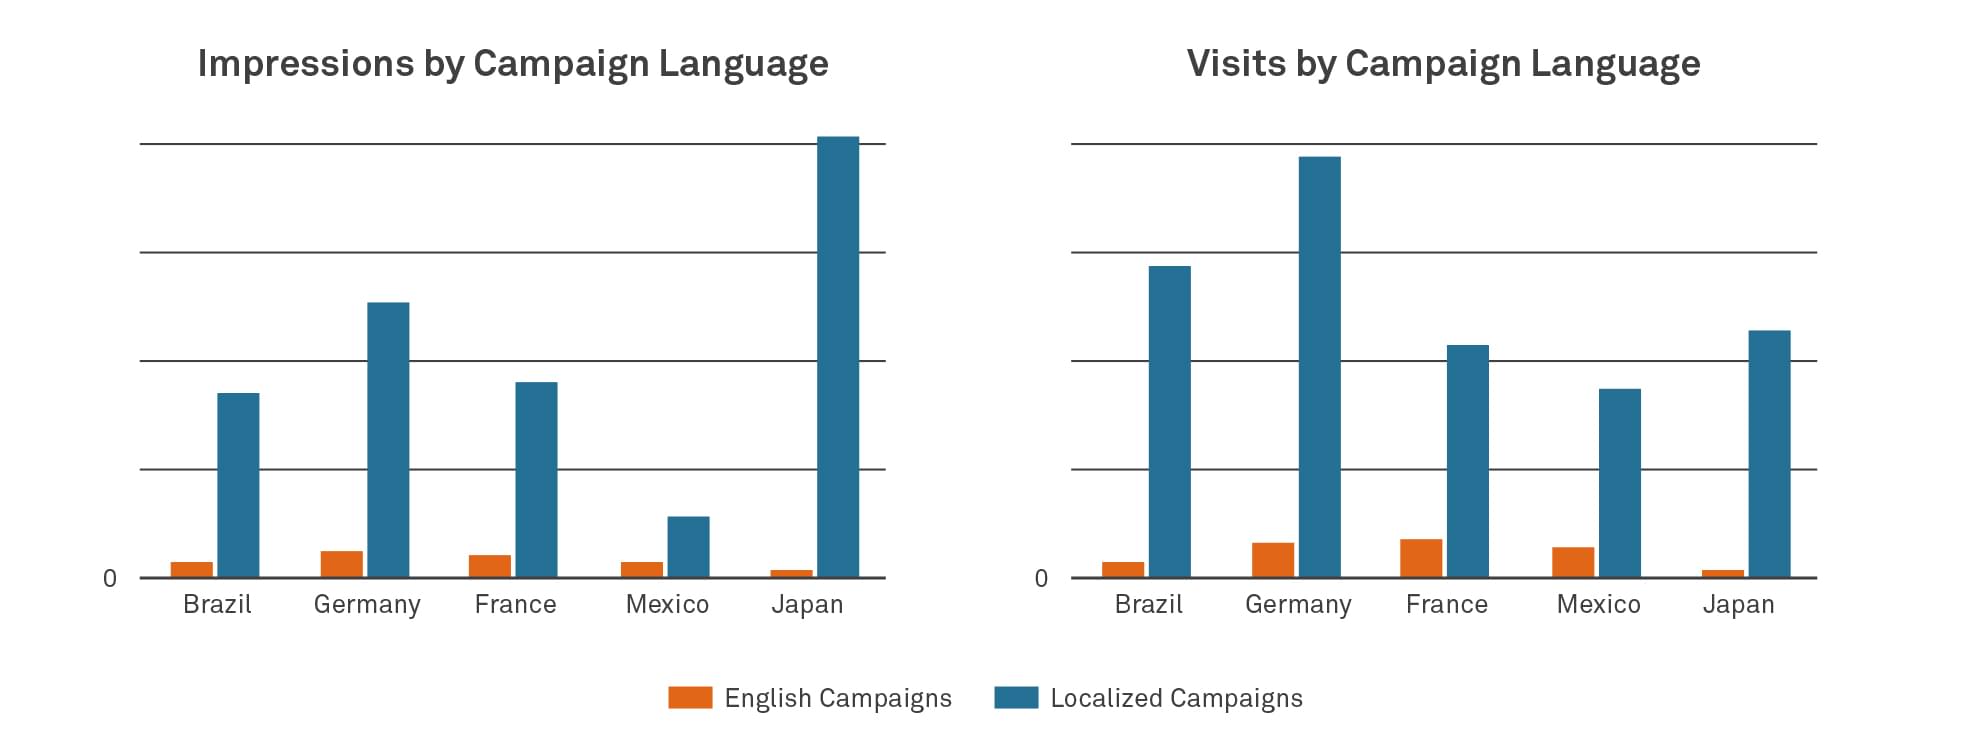 Impressions by campaign language